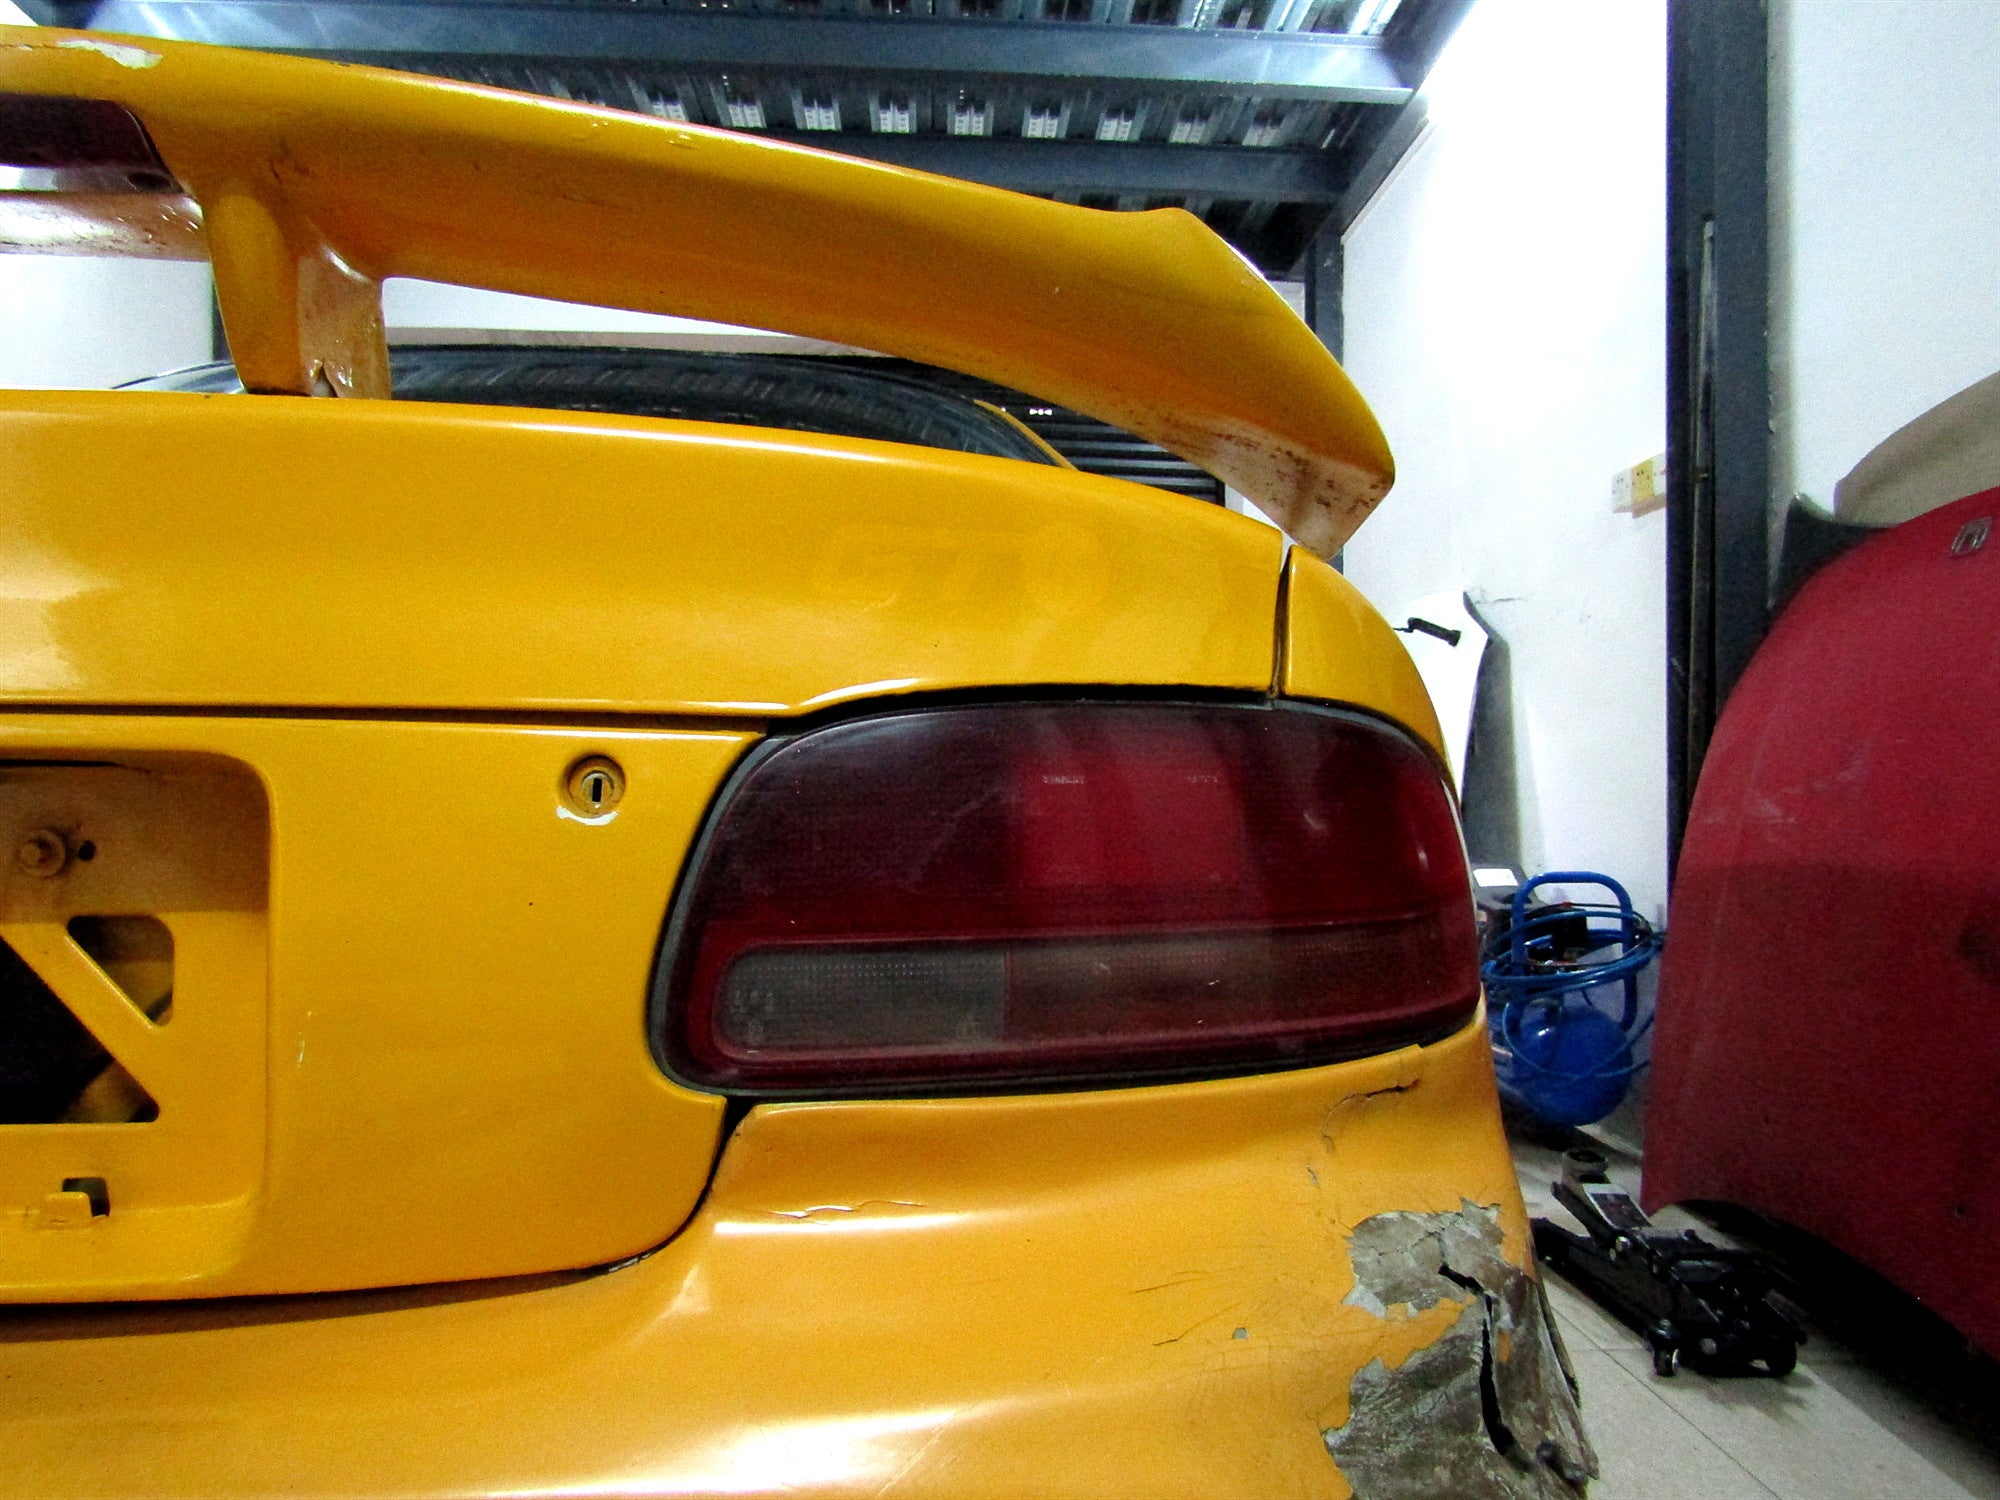 AP1project 1995 Toyota Celica 7A-FE